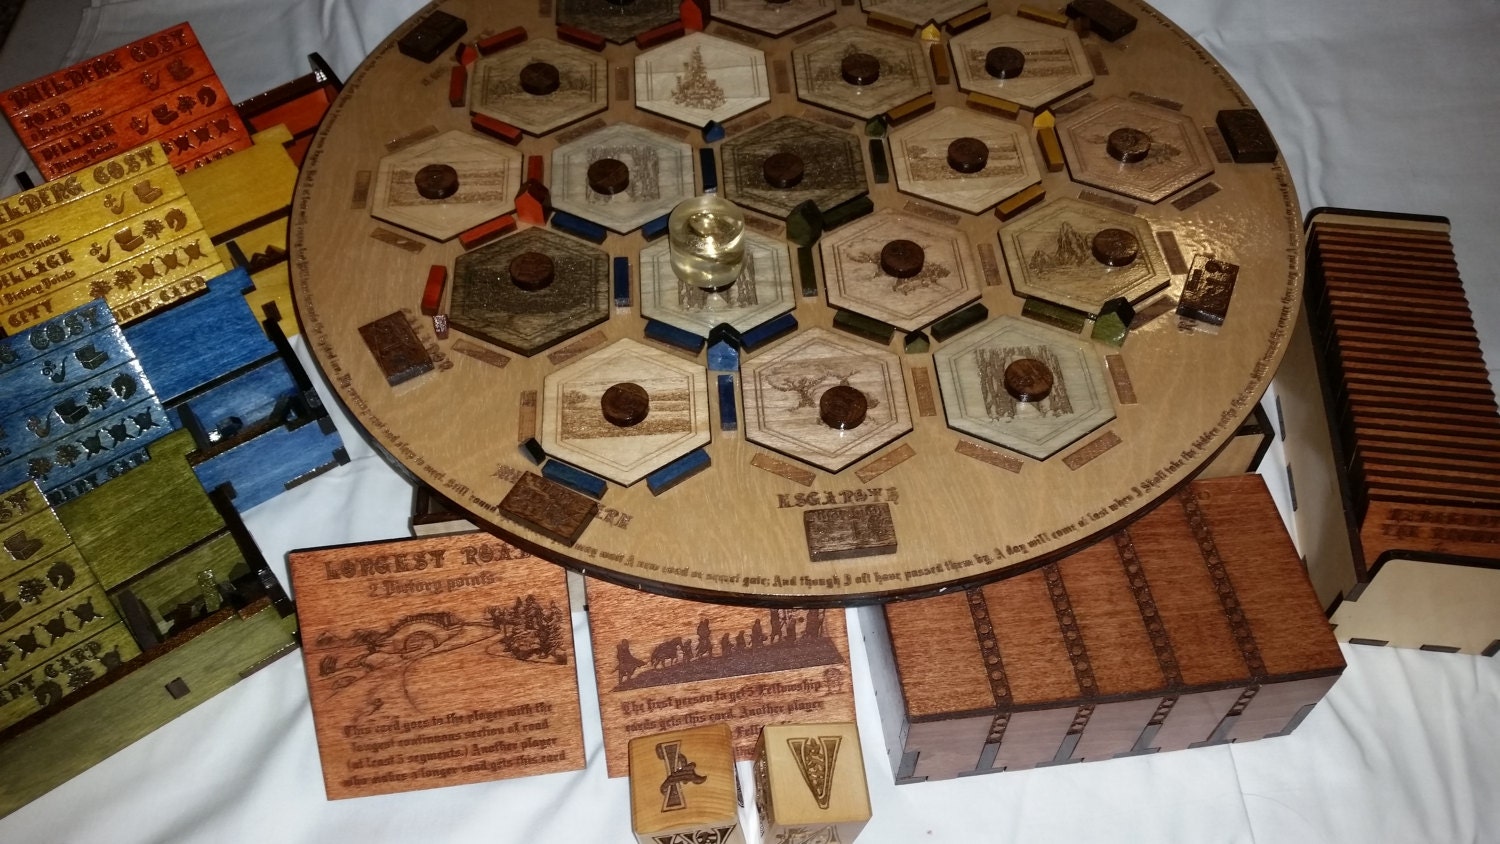 LORD of the RINGS/HOBBIT Settlers of Catan Board Game